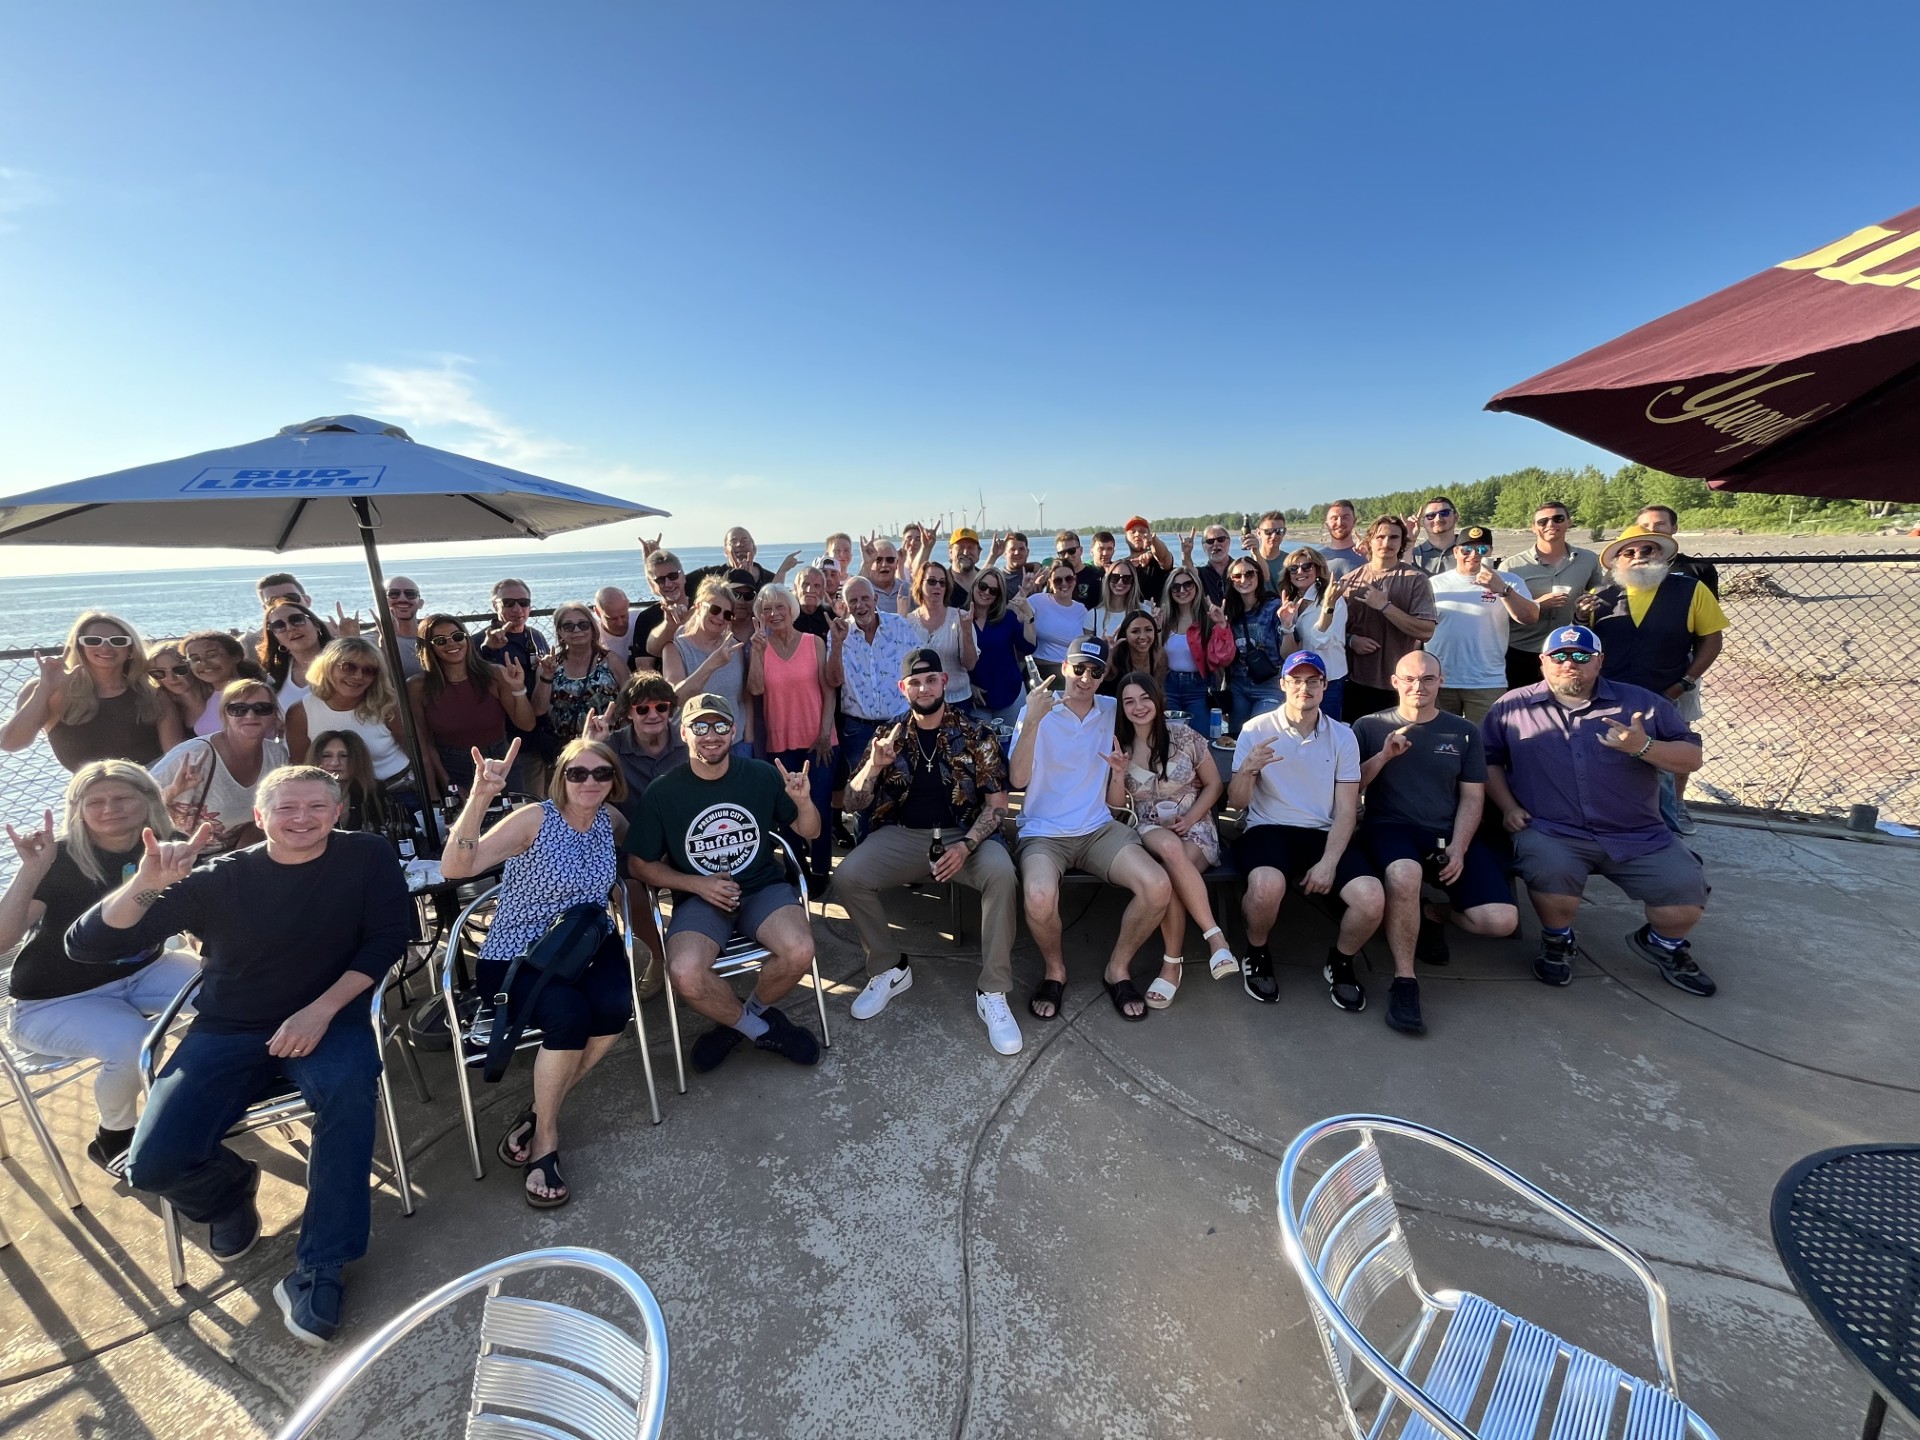 97 Rock Happy Hour at The Cowboy on the Lake!